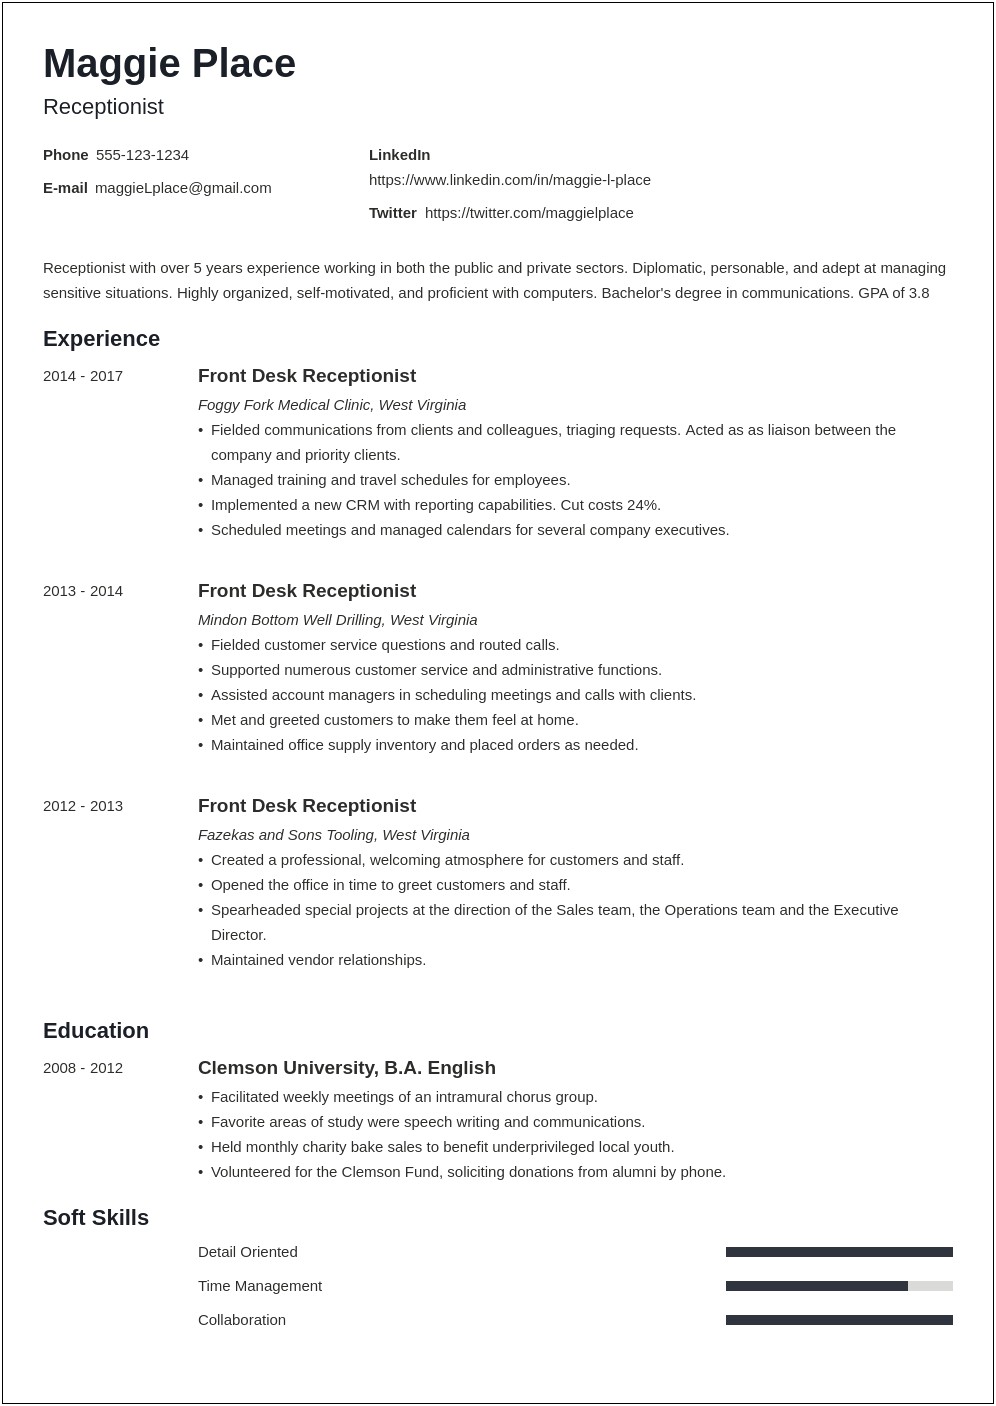 Skills Section Of Resume For Receptionist